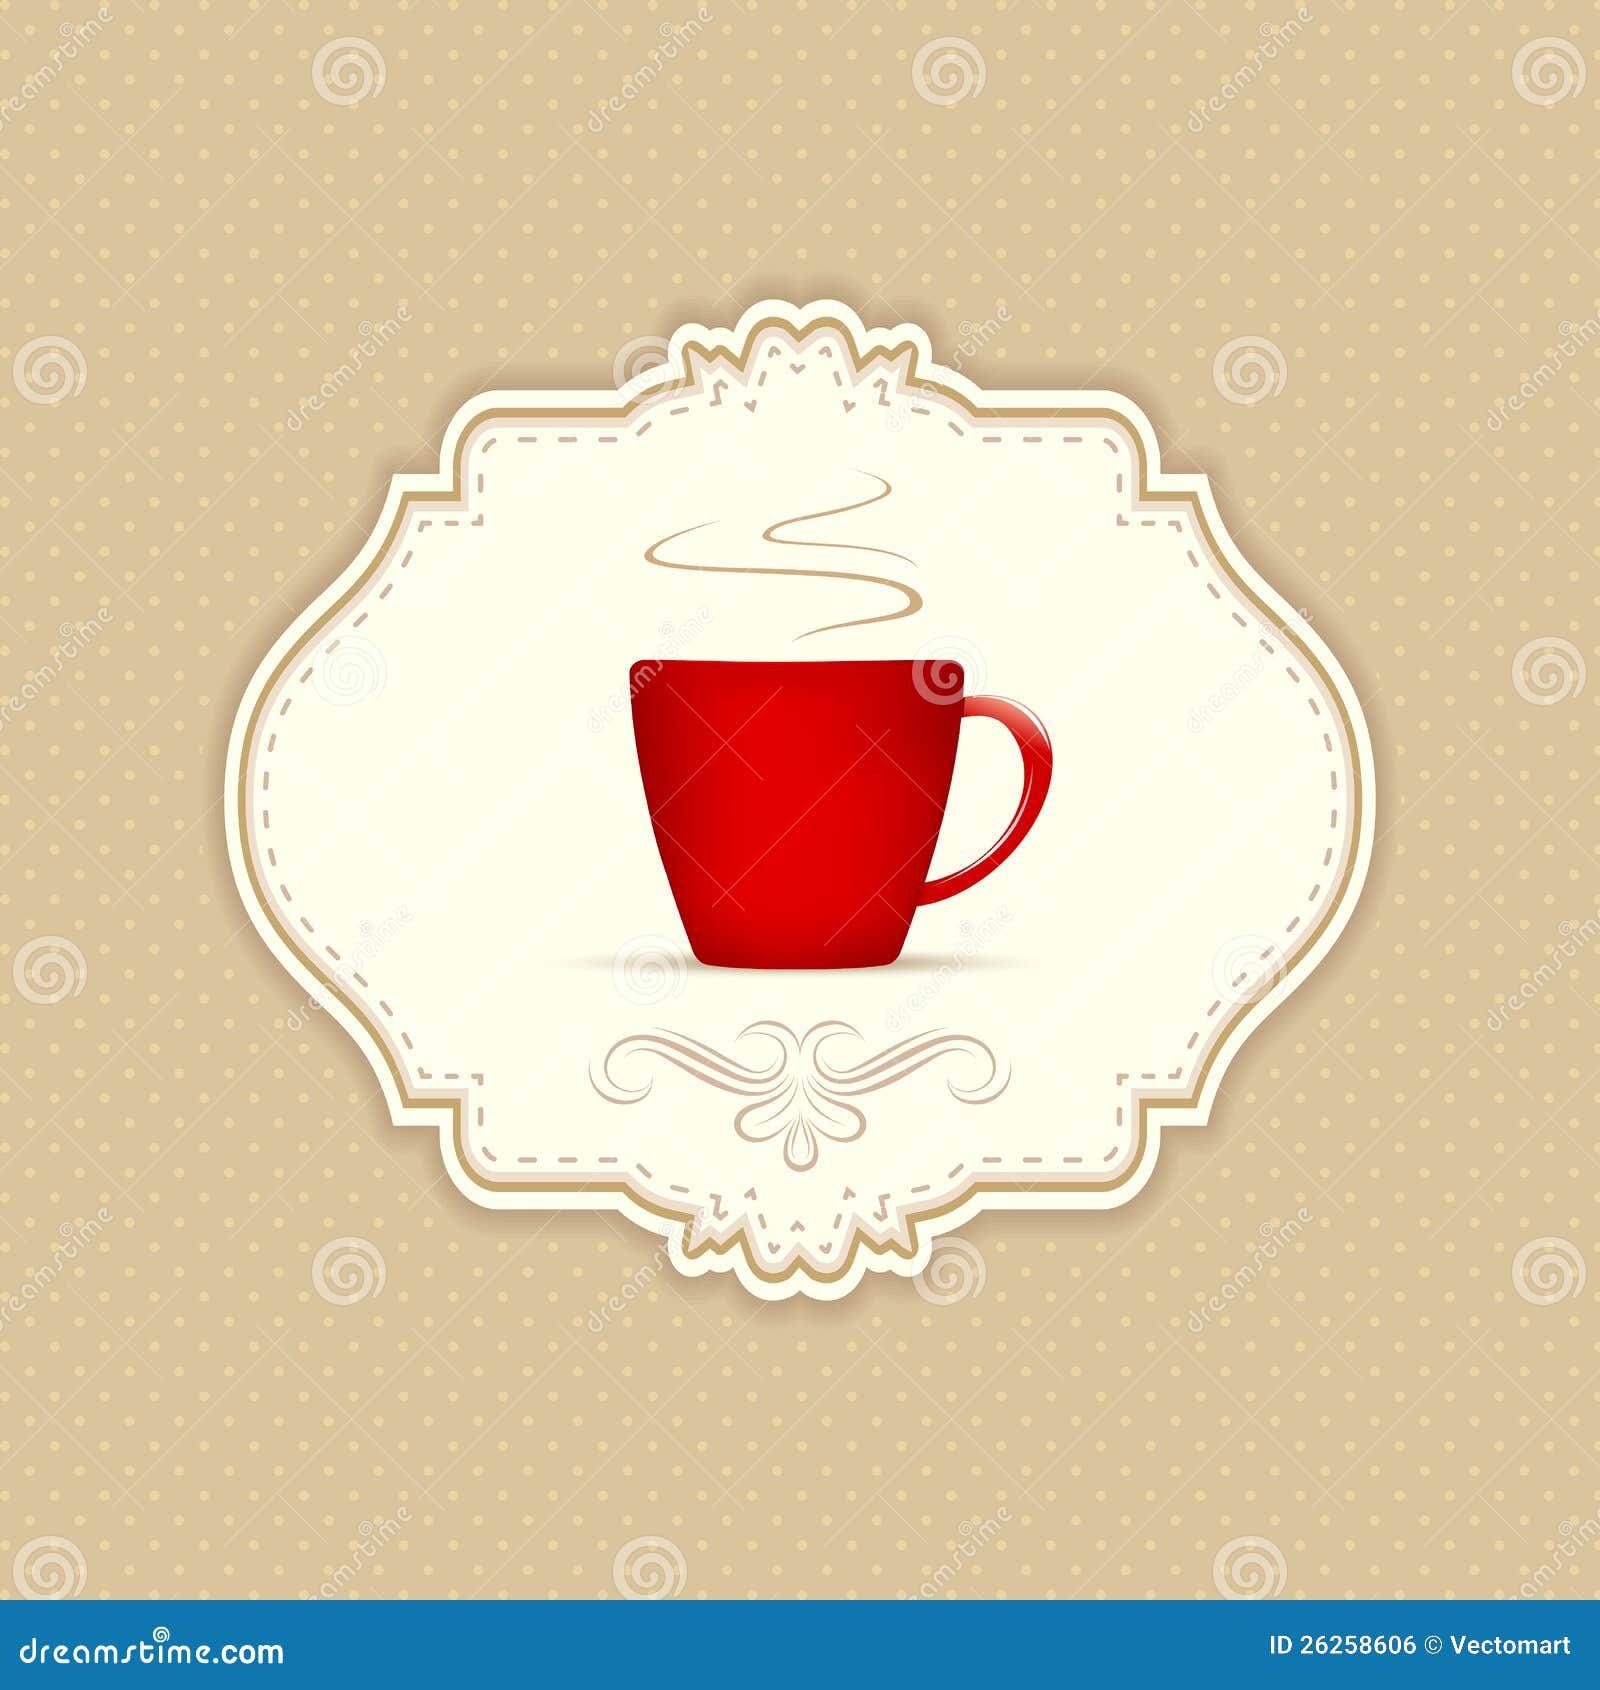 Coffee Menu. Illustration of cup of hot coffee cup on patterned background